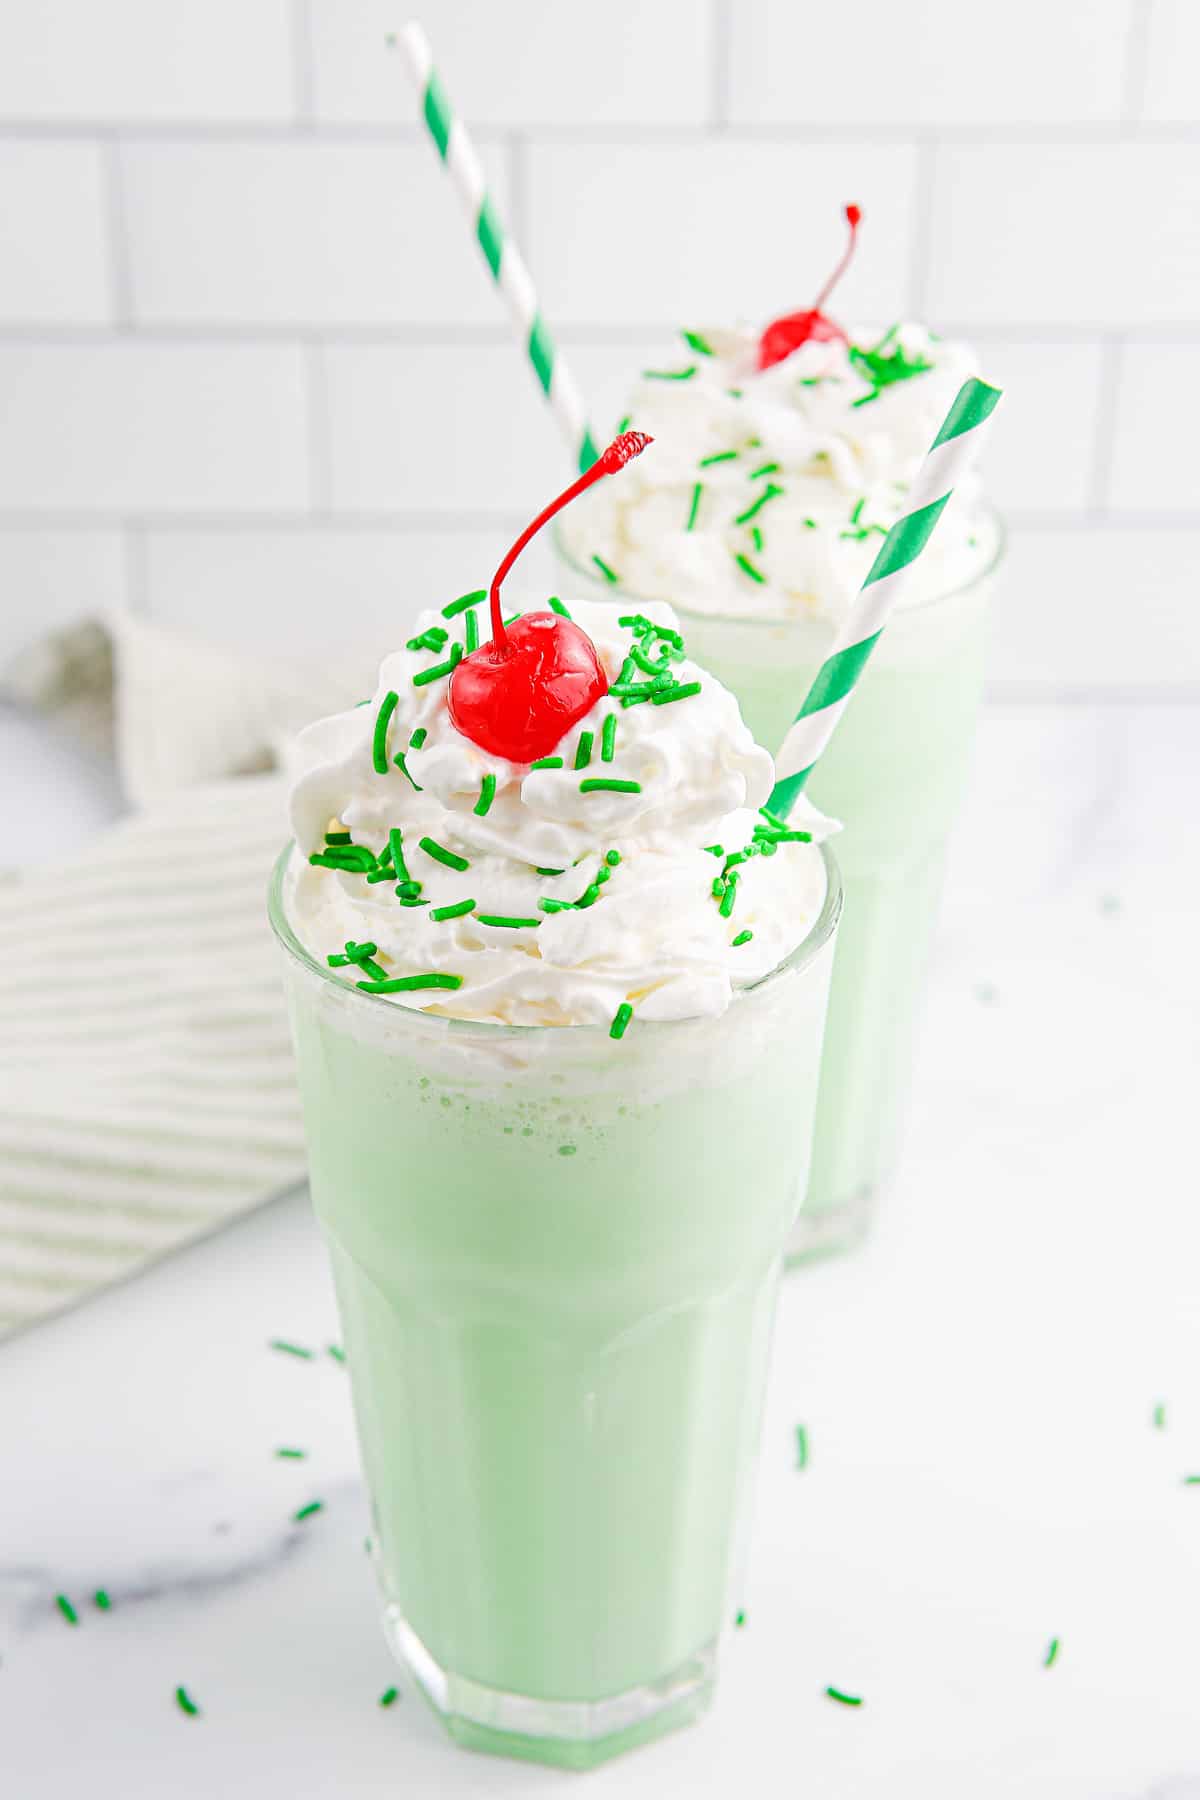 Two milkshake glassed filled with green shamrock shake topped with whipped cream, cherries and green sprinkles with green and white straws in them and a light green and white towel in the background.